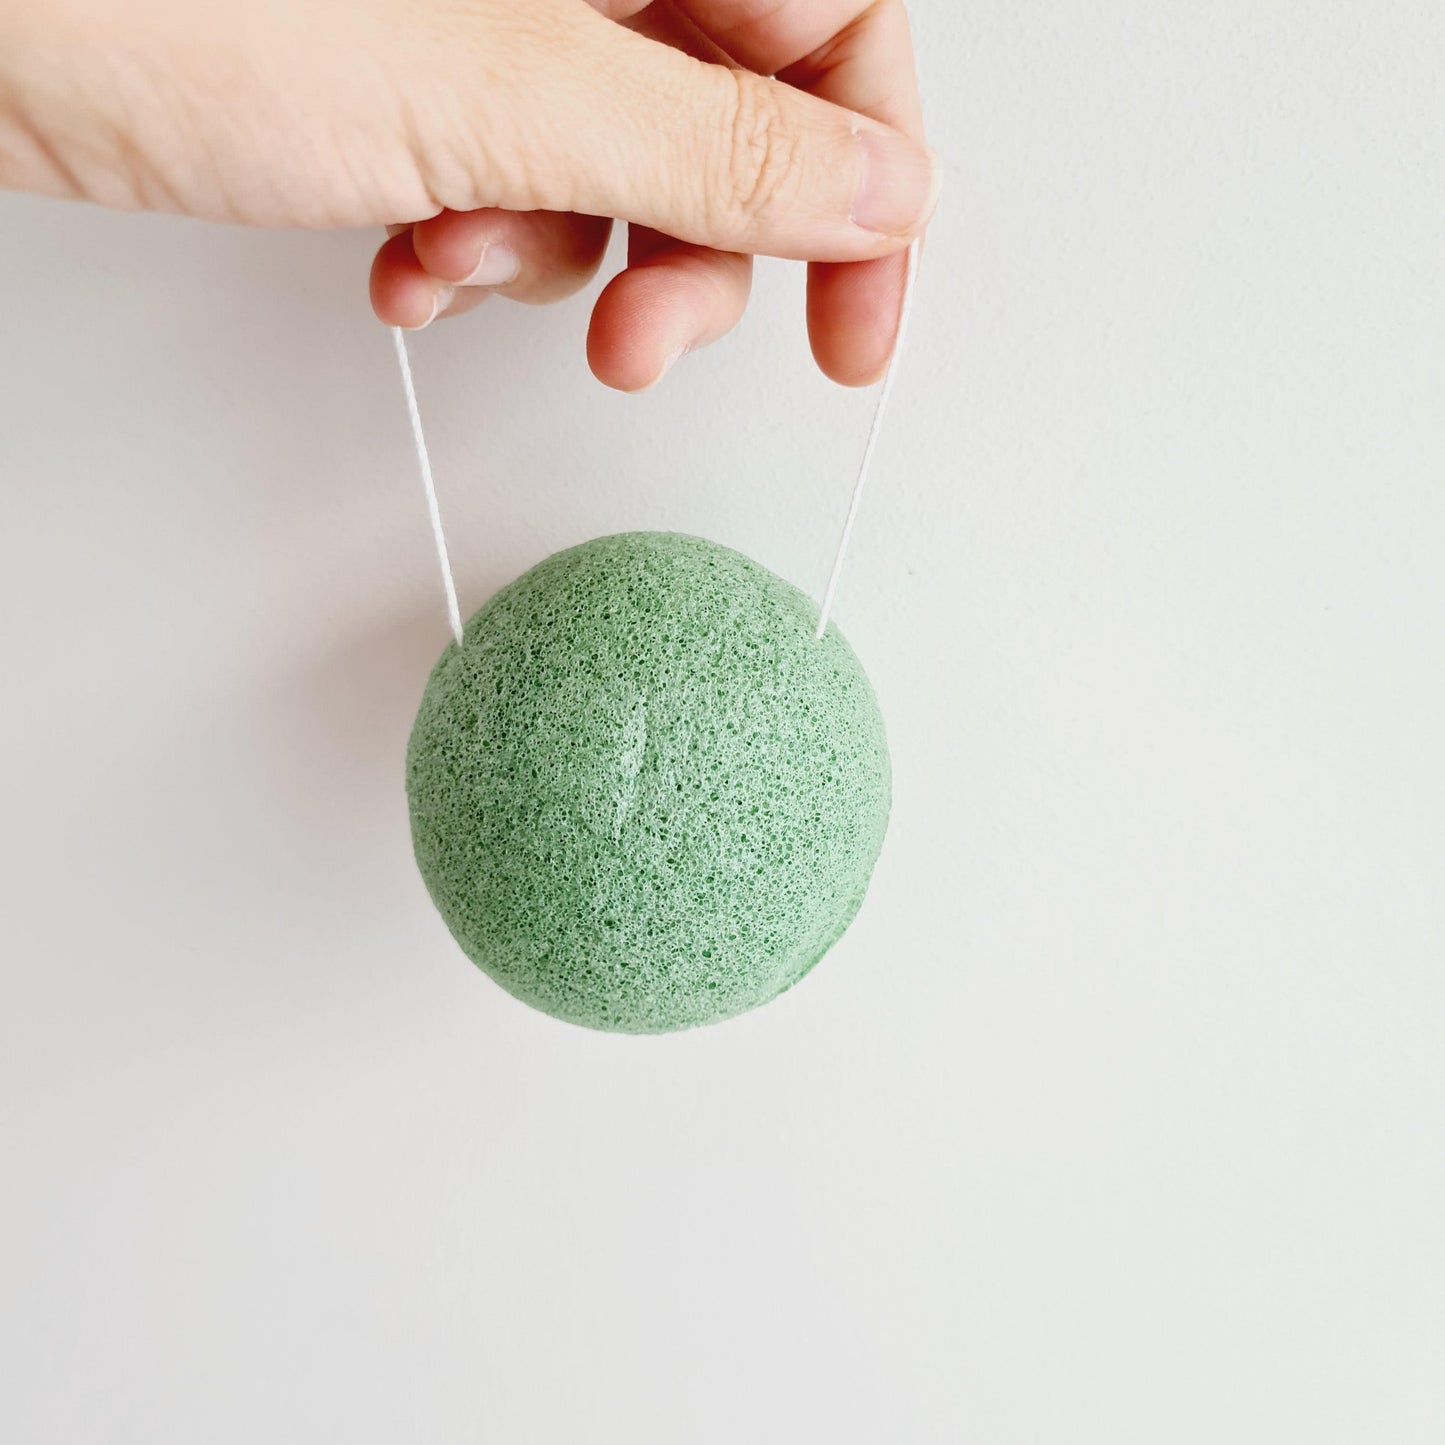 Bundle pack 3xKonjac Sponges - Green for normal to oily skin